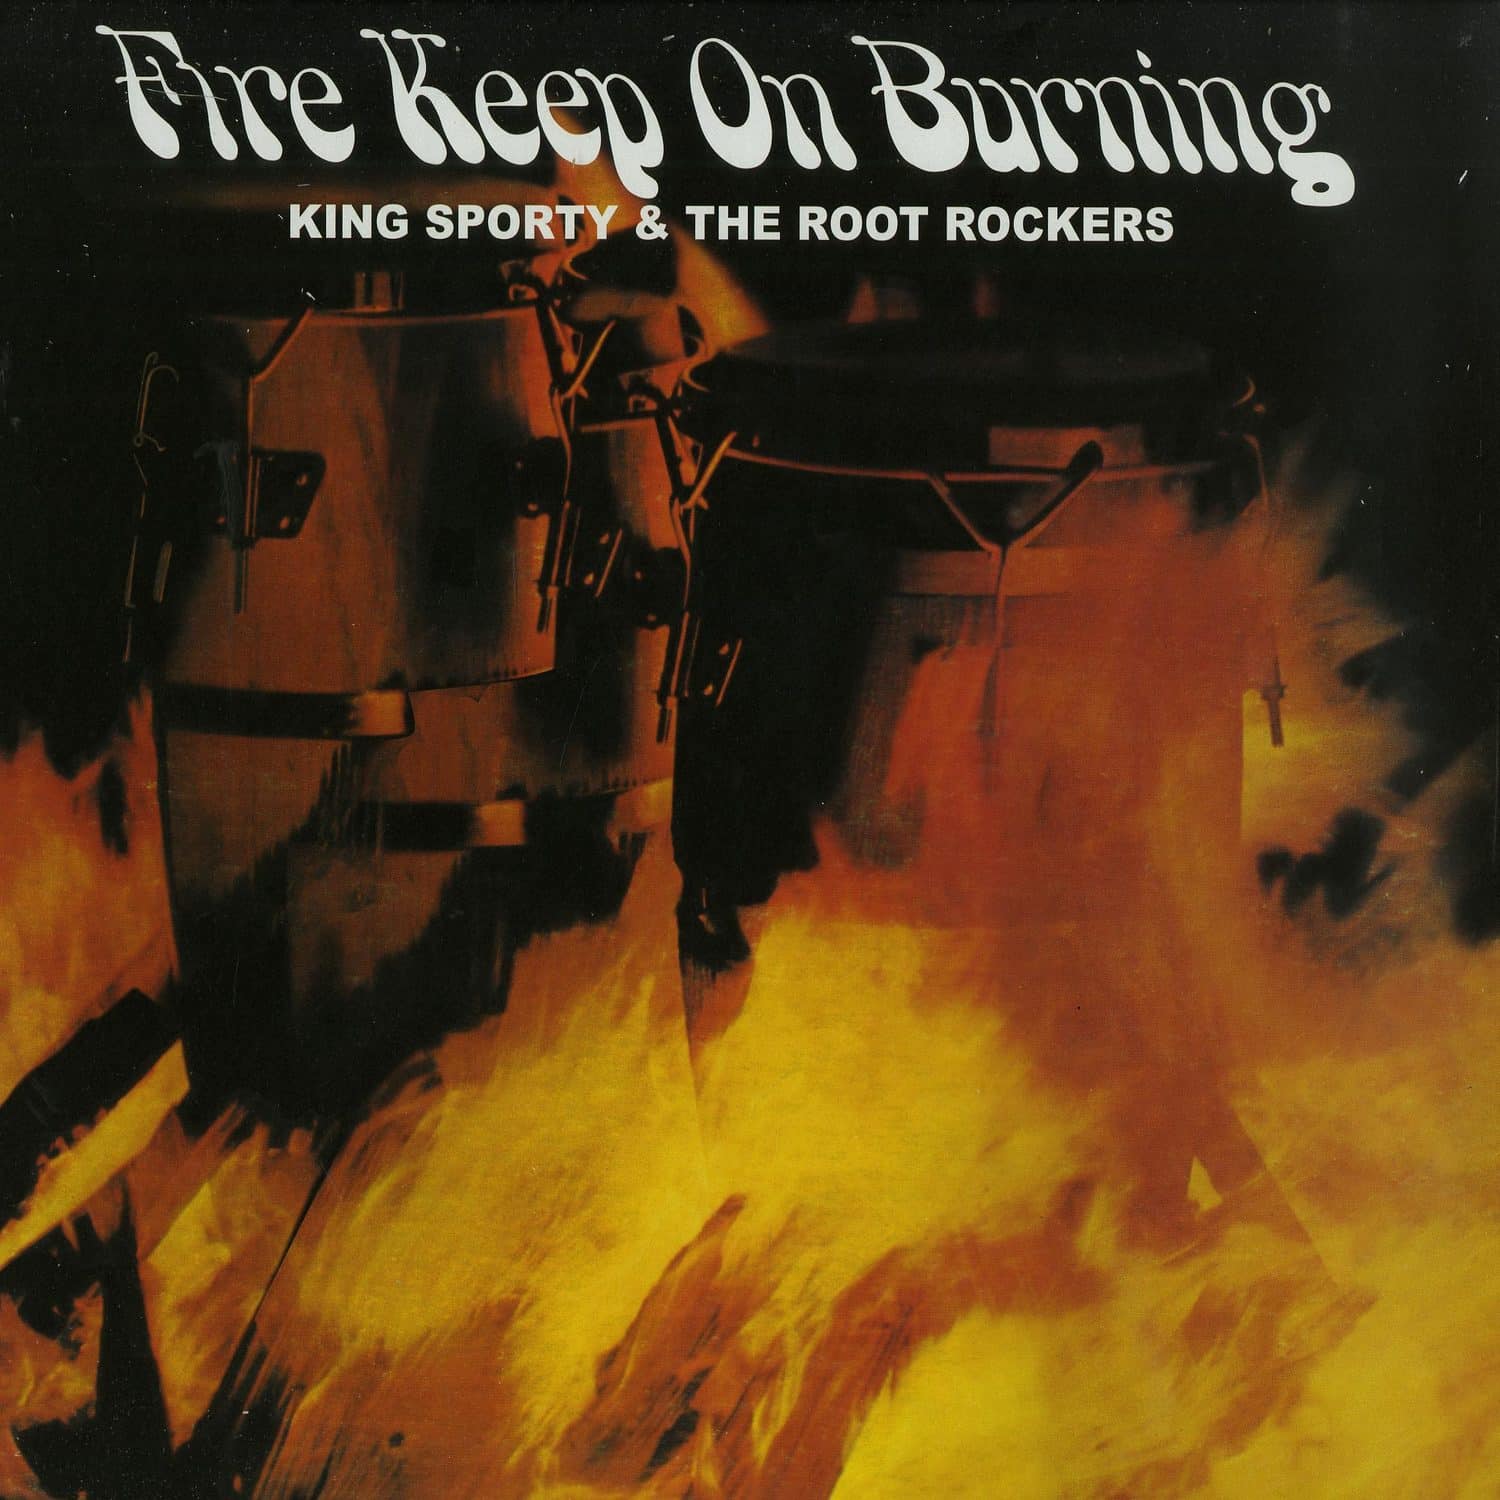 King Sporty & The Root Rockers - FIRE KEEP ON BURNING 